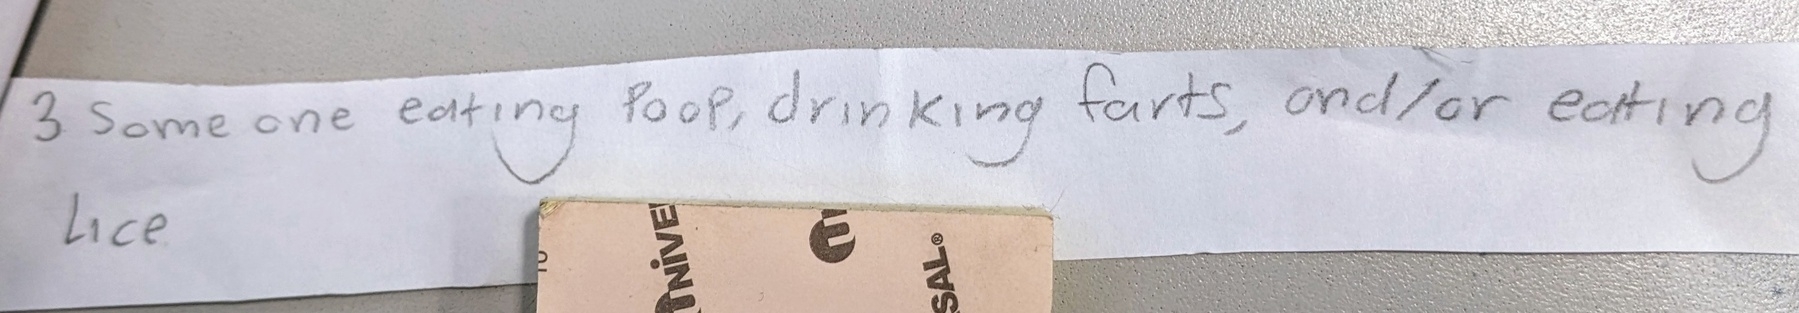 A photo of a strip of paper on a desk. The paper says, "3. Someone eating poop, drinking farts, and/or eating lice."